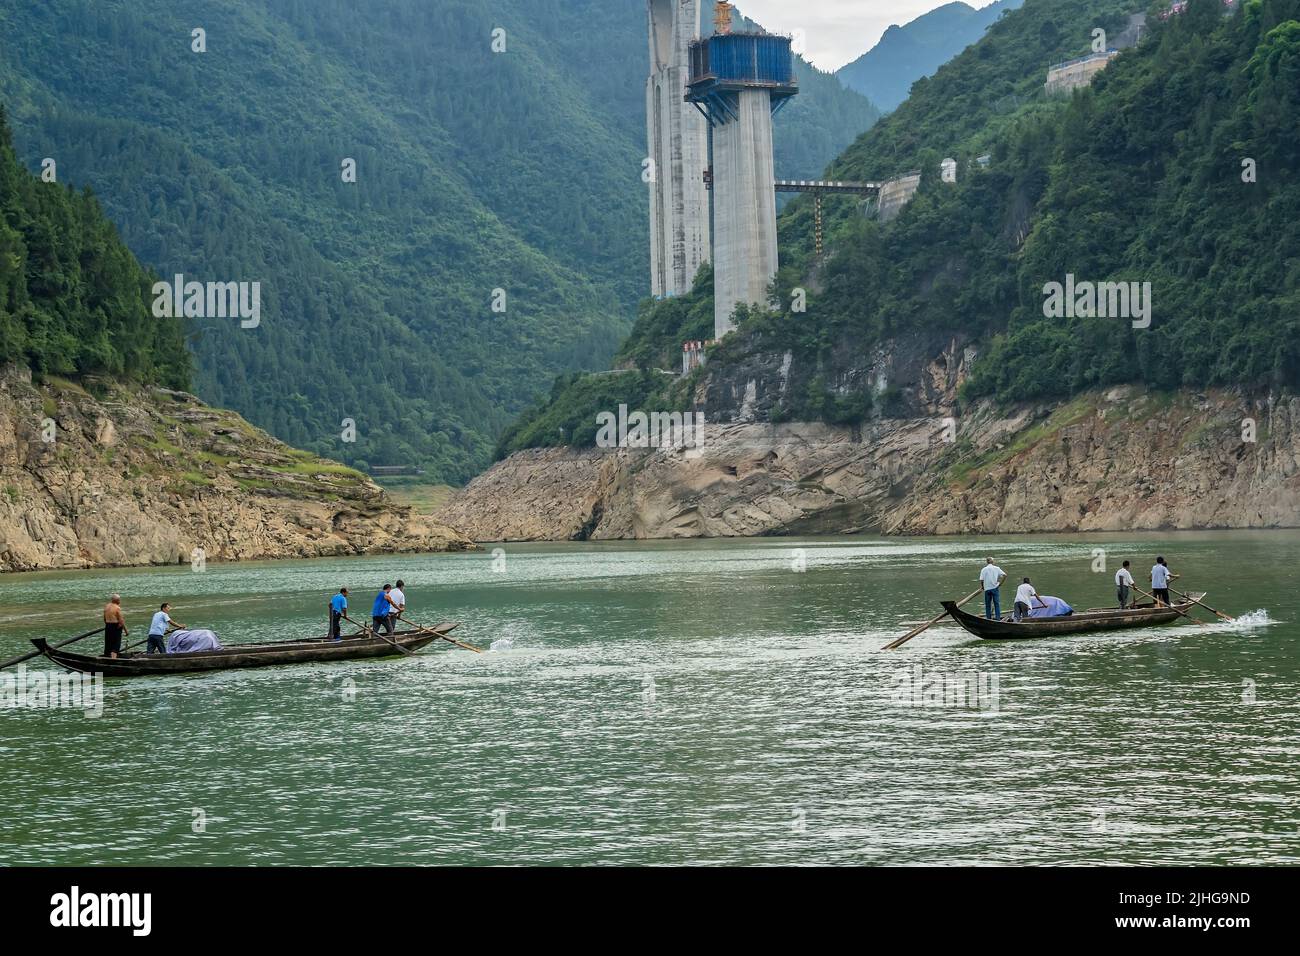 Yangtze River, China - August 2019 : Men catching fish from a small crowded fisherman boats on the Shennong Xi Stream, estuary of the mighty Yangtze r Stock Photo